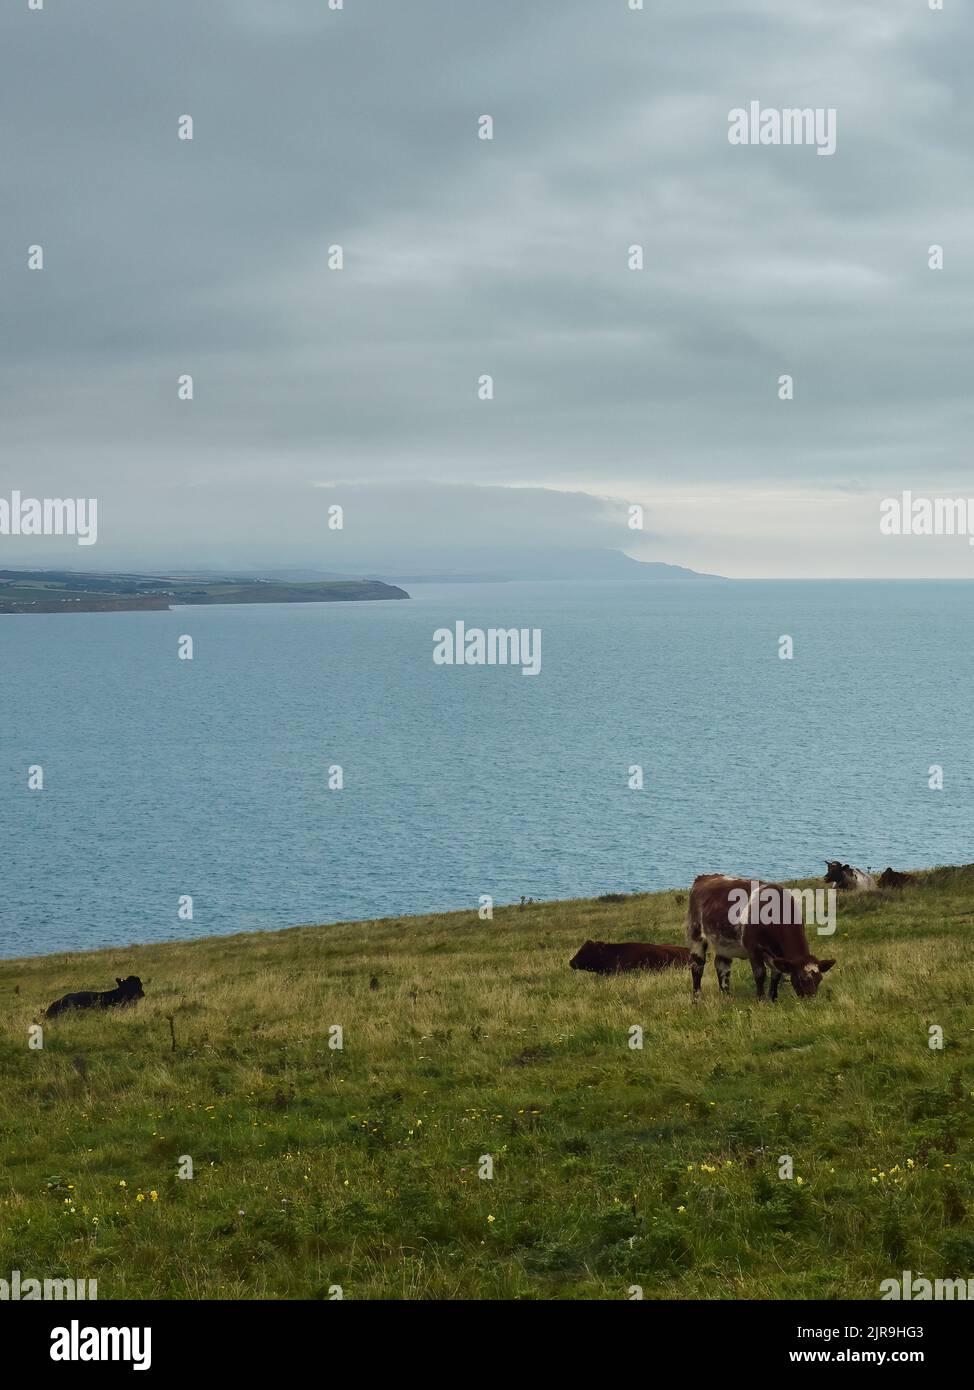 A thick, obscuring fog bank rolls over the Freshwater headland across the bay, while oblivious cows graze and rest. Stock Photo